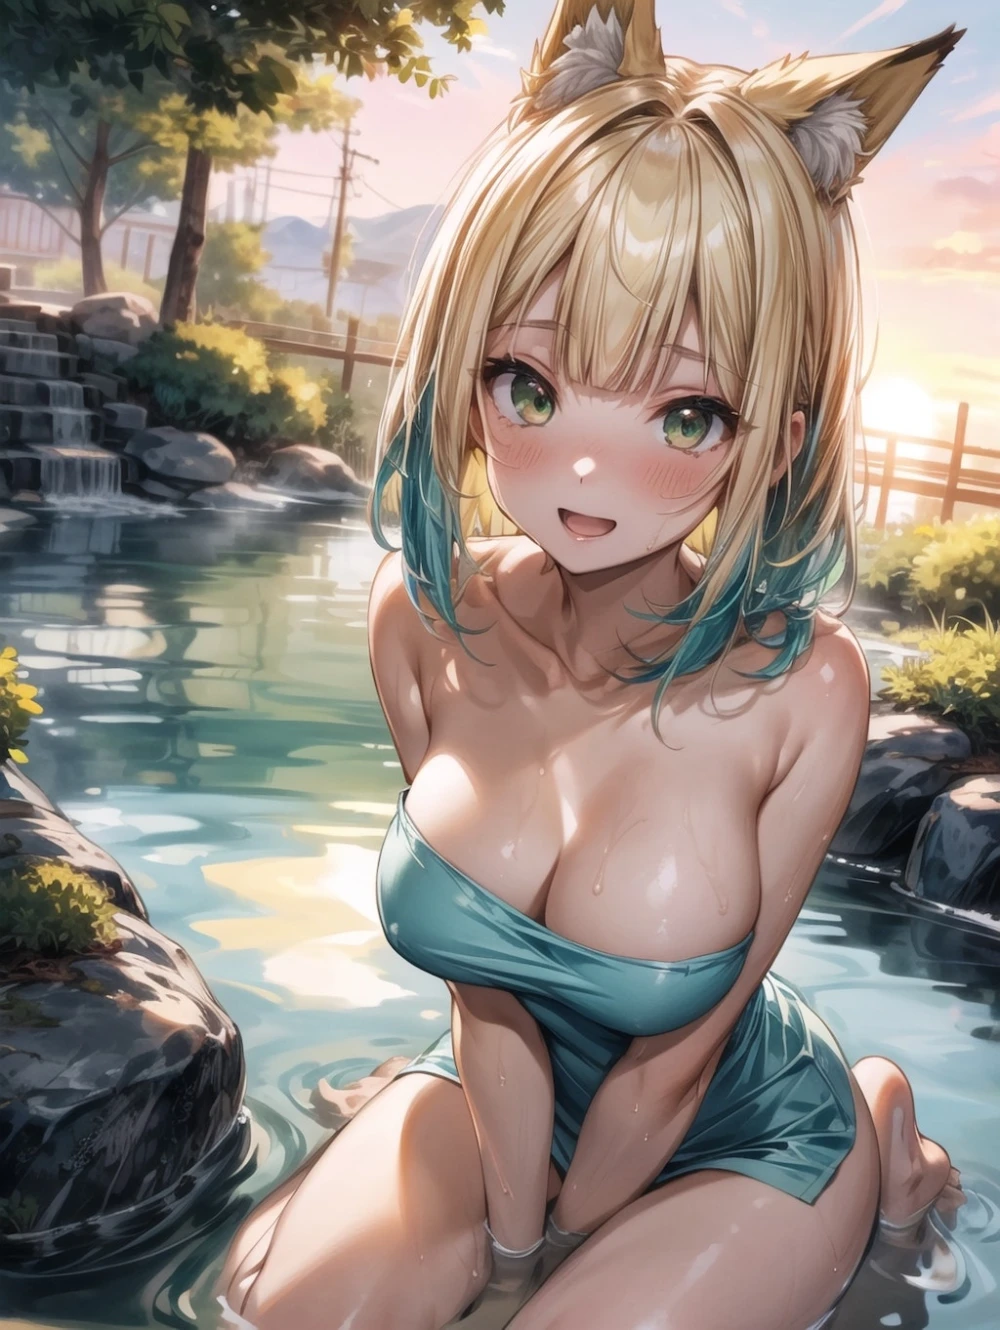 onsen-anime-style-all-ages-21